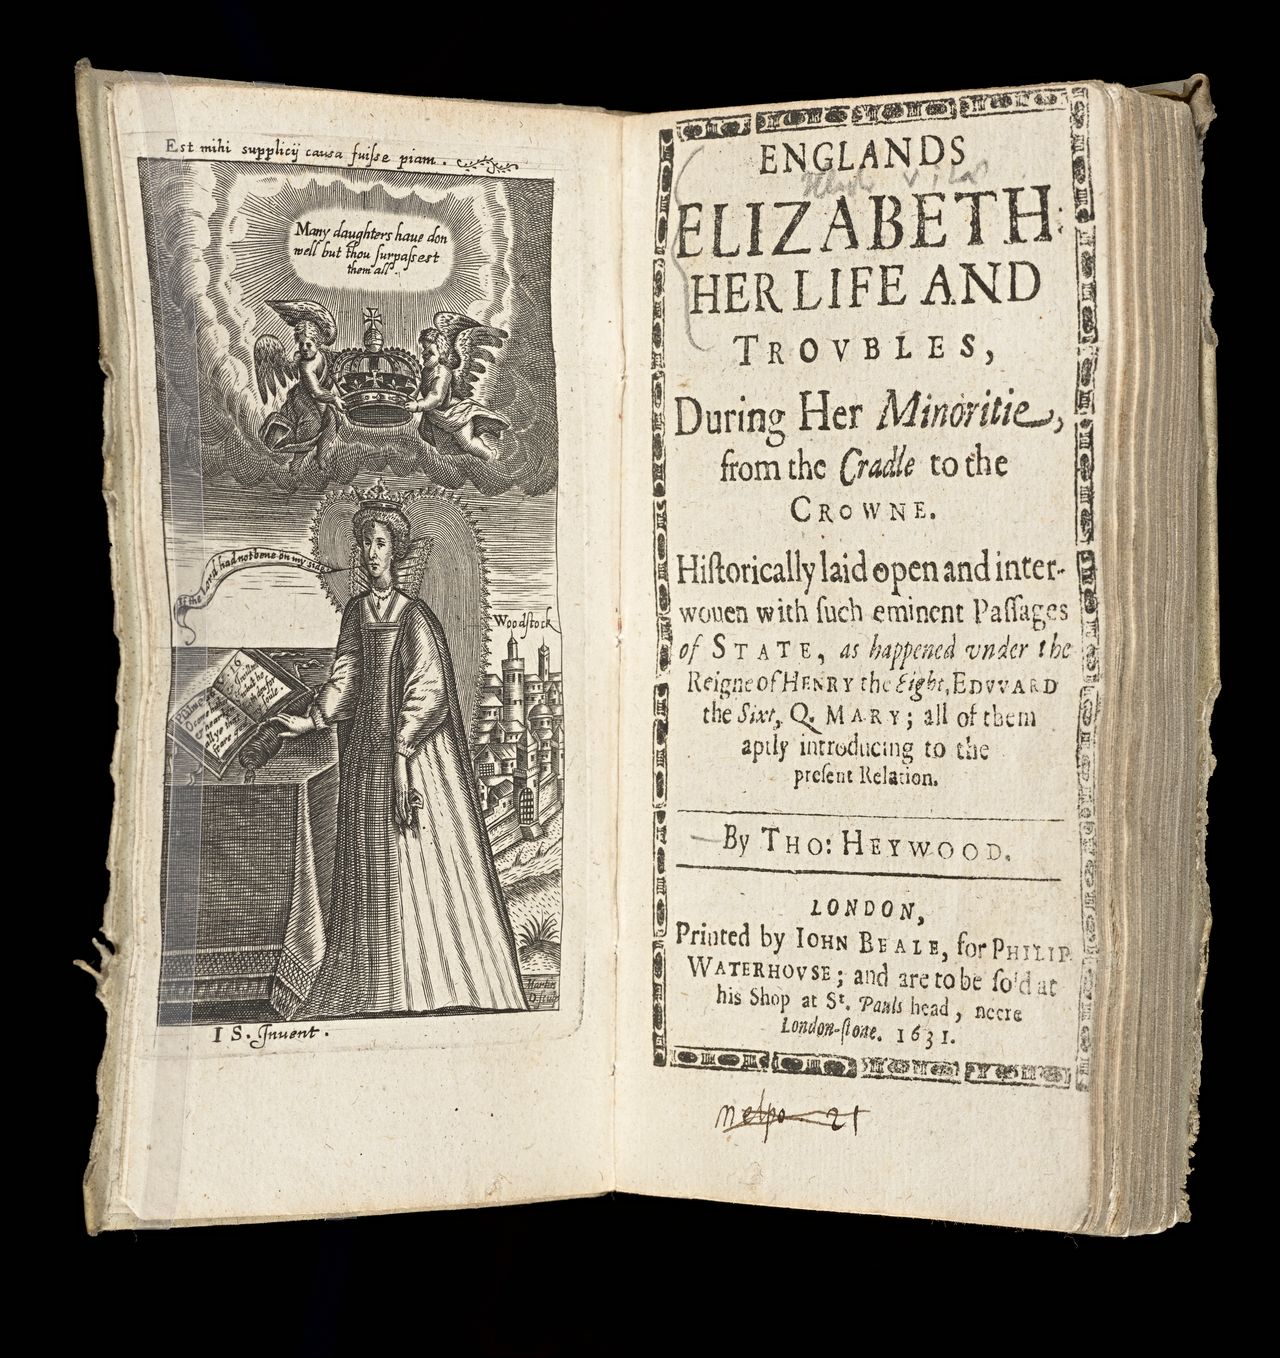 Thomas Heywood, <em>Englands Elizabeth: her life and troubles during her minoritie from the cradle to the crowne...</em> London, printed by Iohn Beale for Philip Waterhouse and are to be sold at his Shop at St. Paul's Head, near London-Stone, 1631, State Library Victoria, Melbourne (RAREEMM 114/10)
